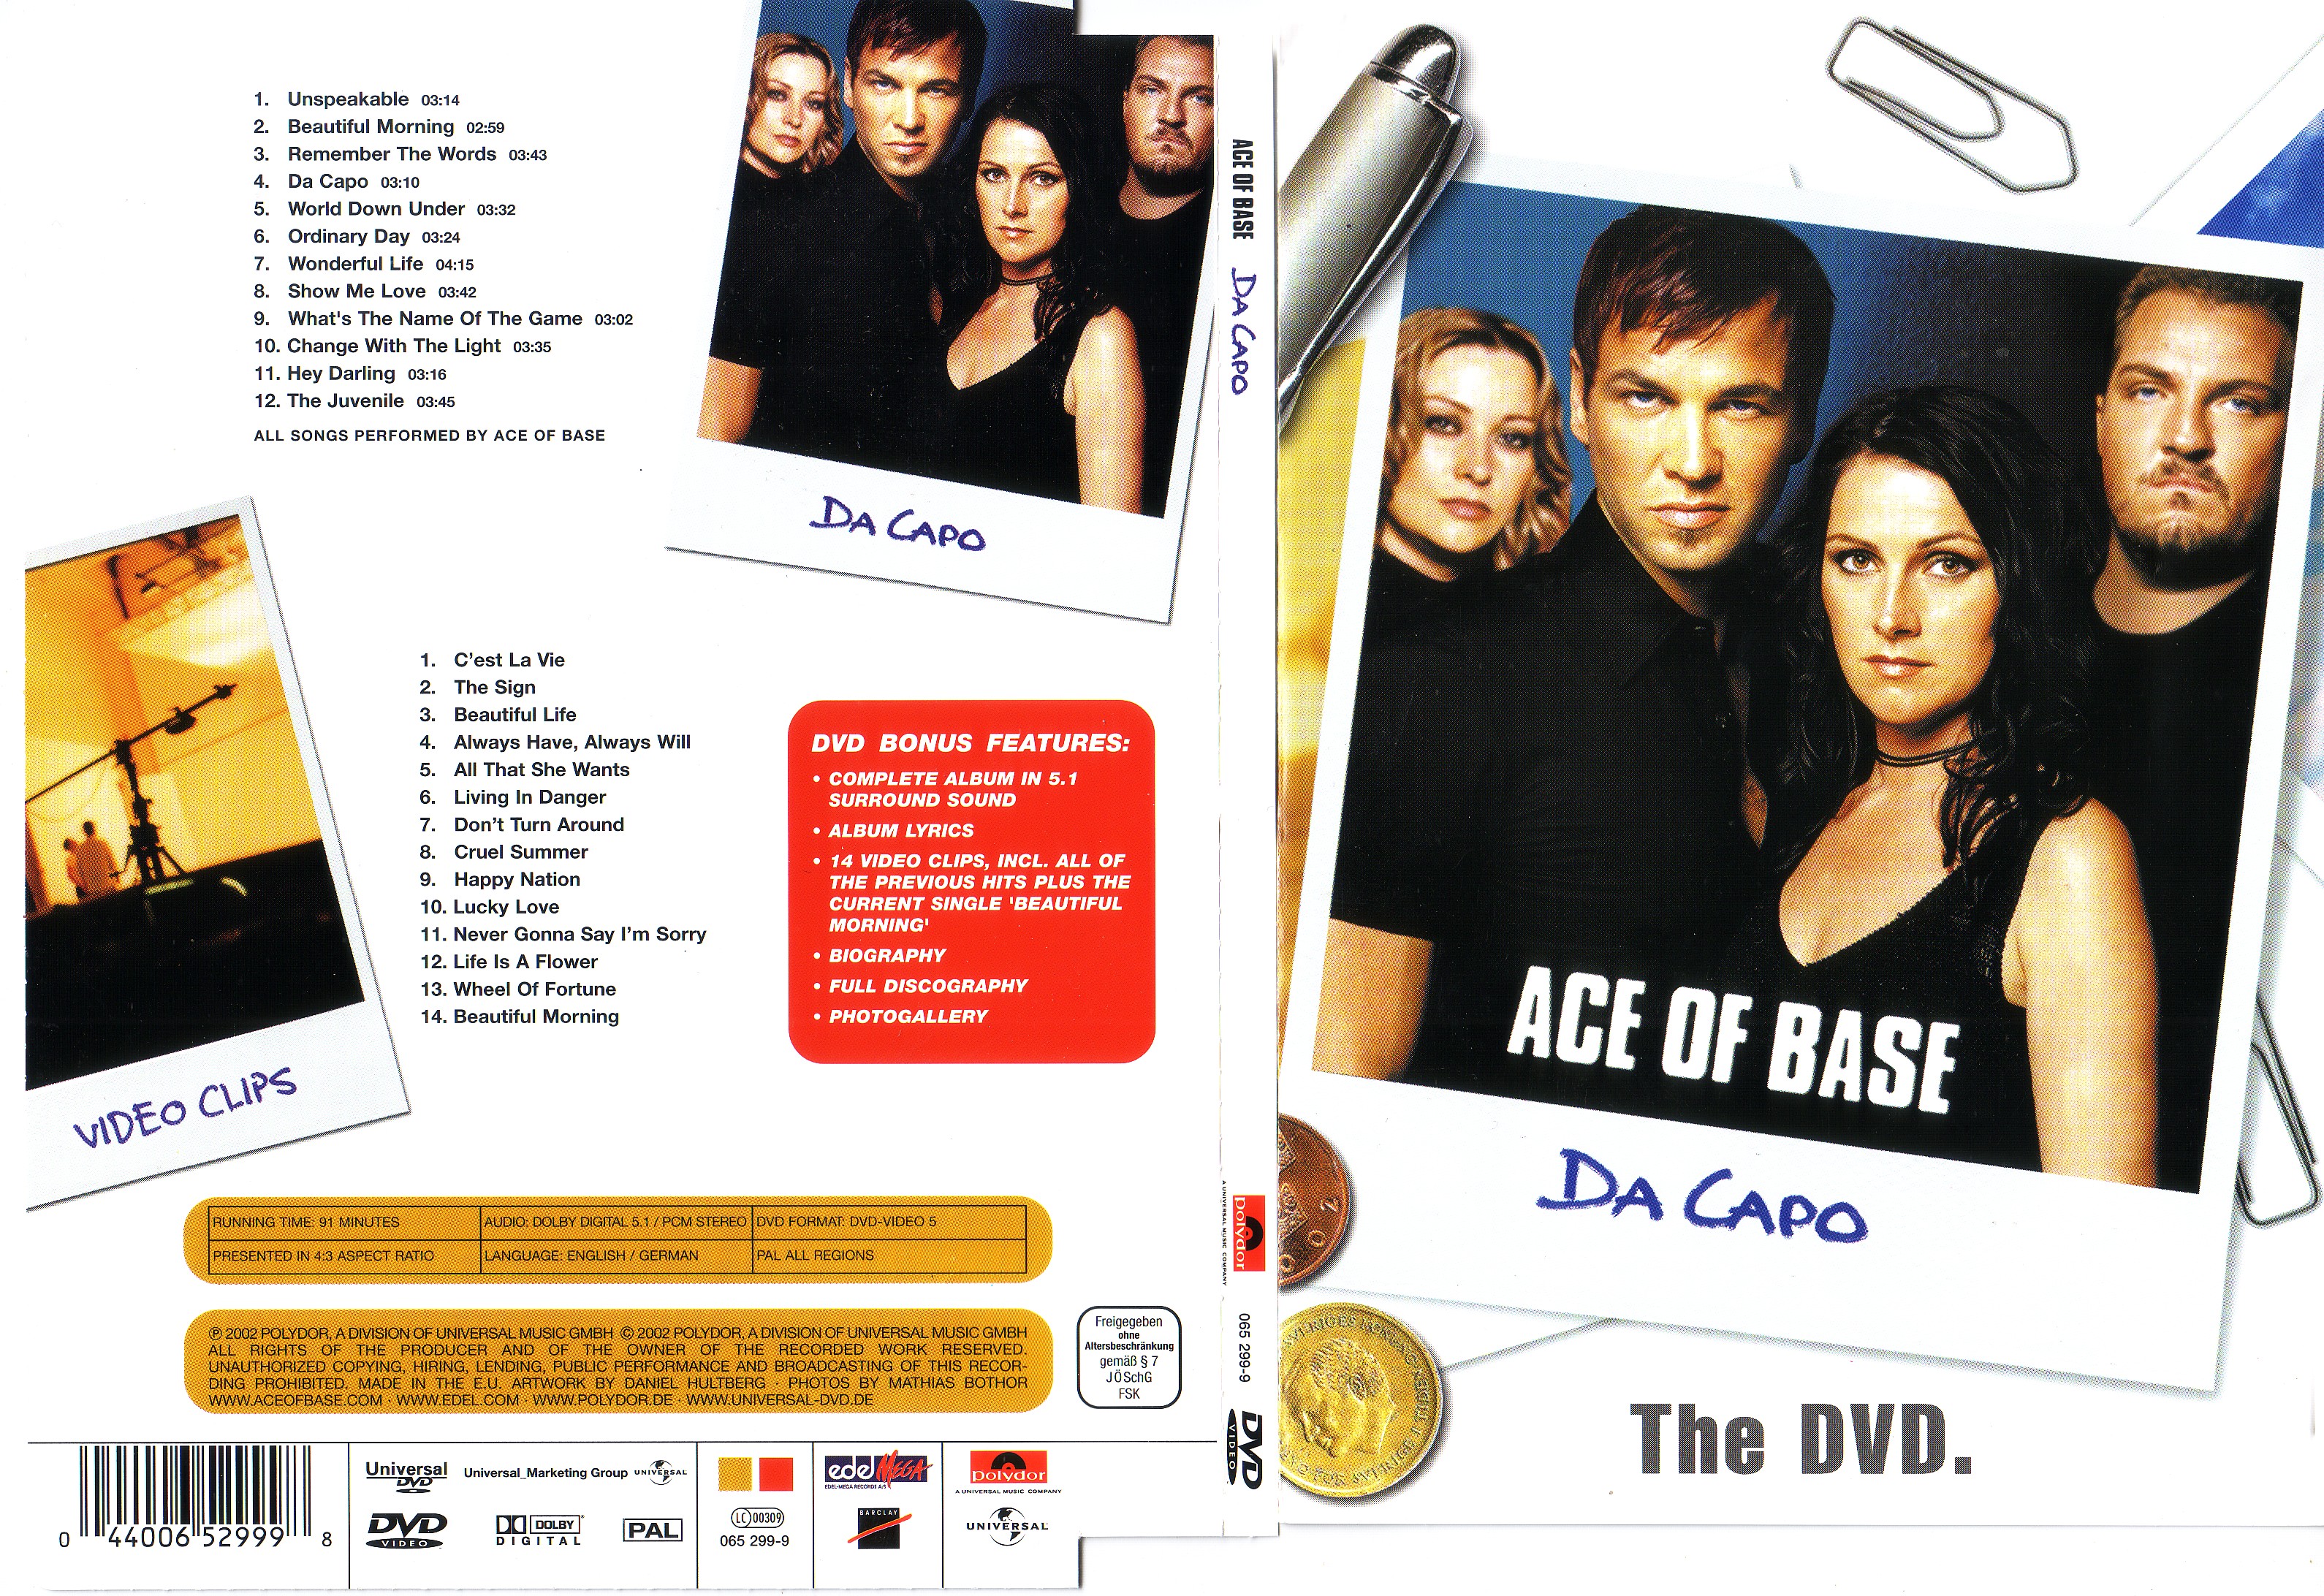 Jaquette DVD Ace of base